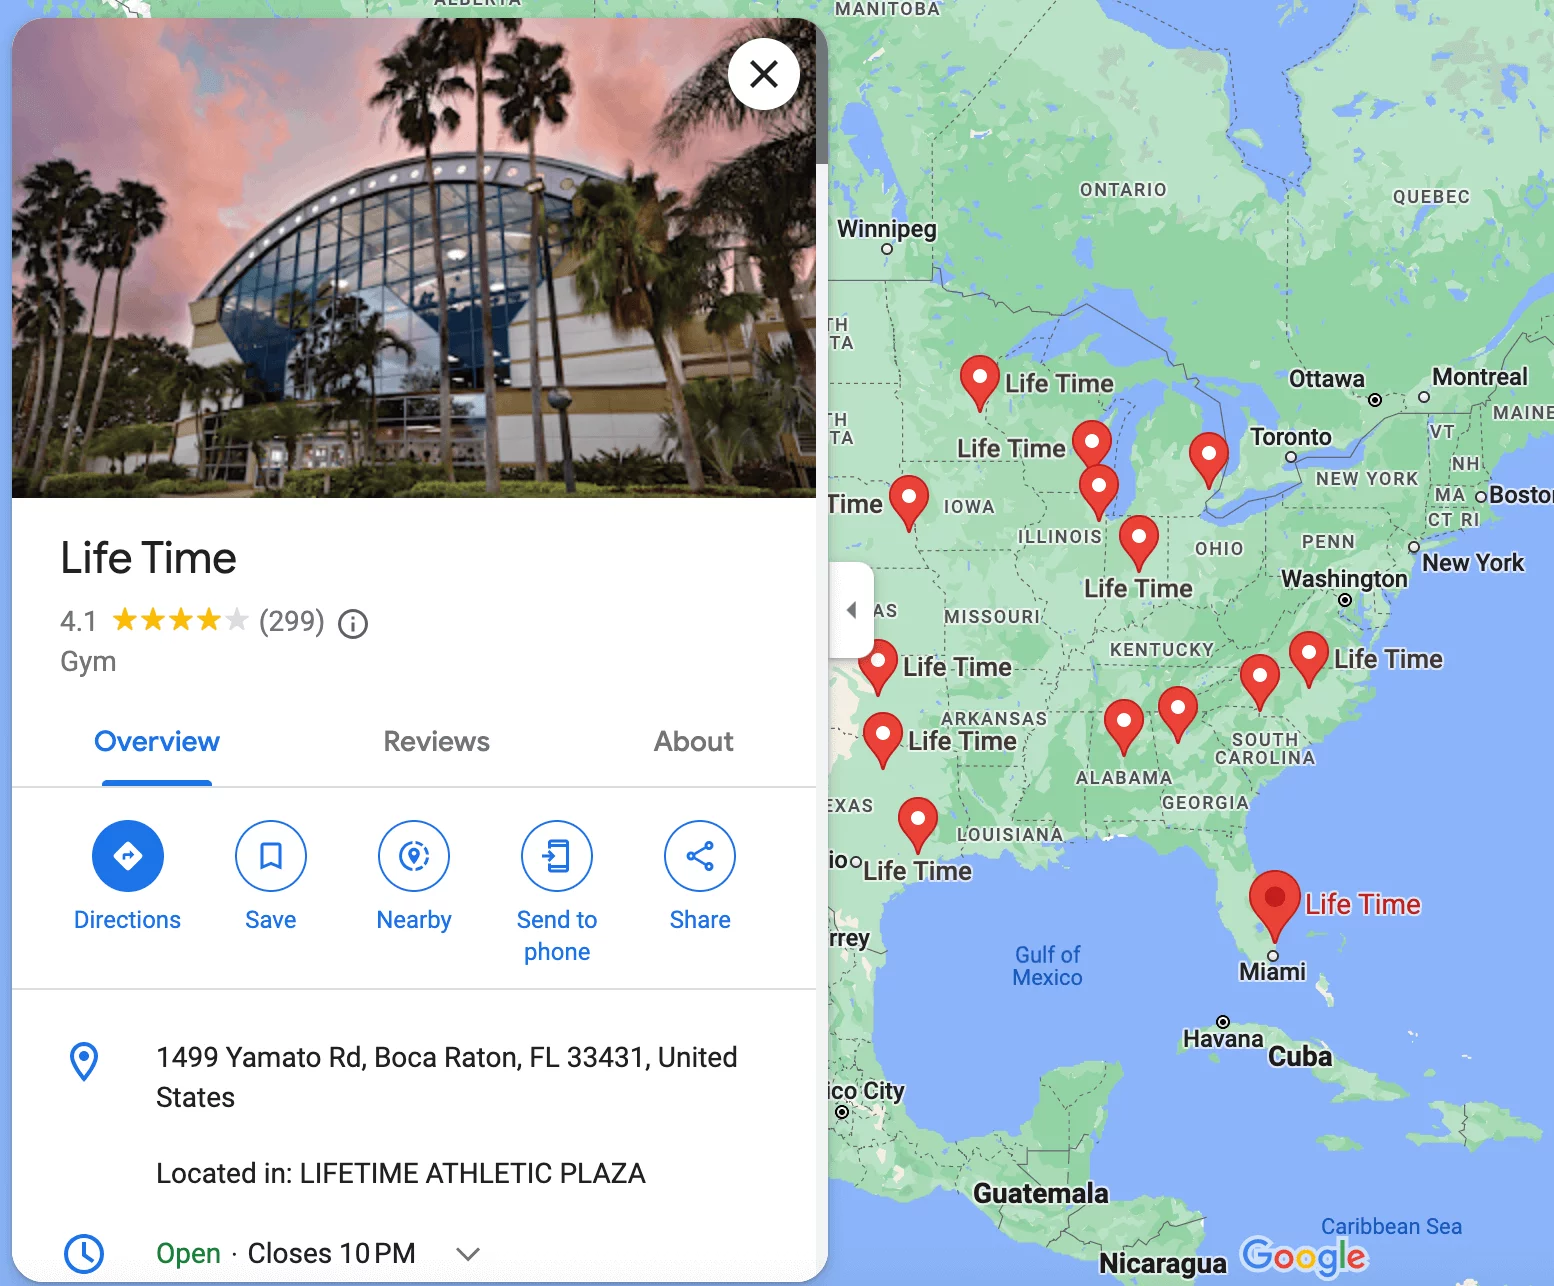 Life Time Fitness Google My Business profile with location's photo and 4.1 rating and business multi locations across America pinned on the map.